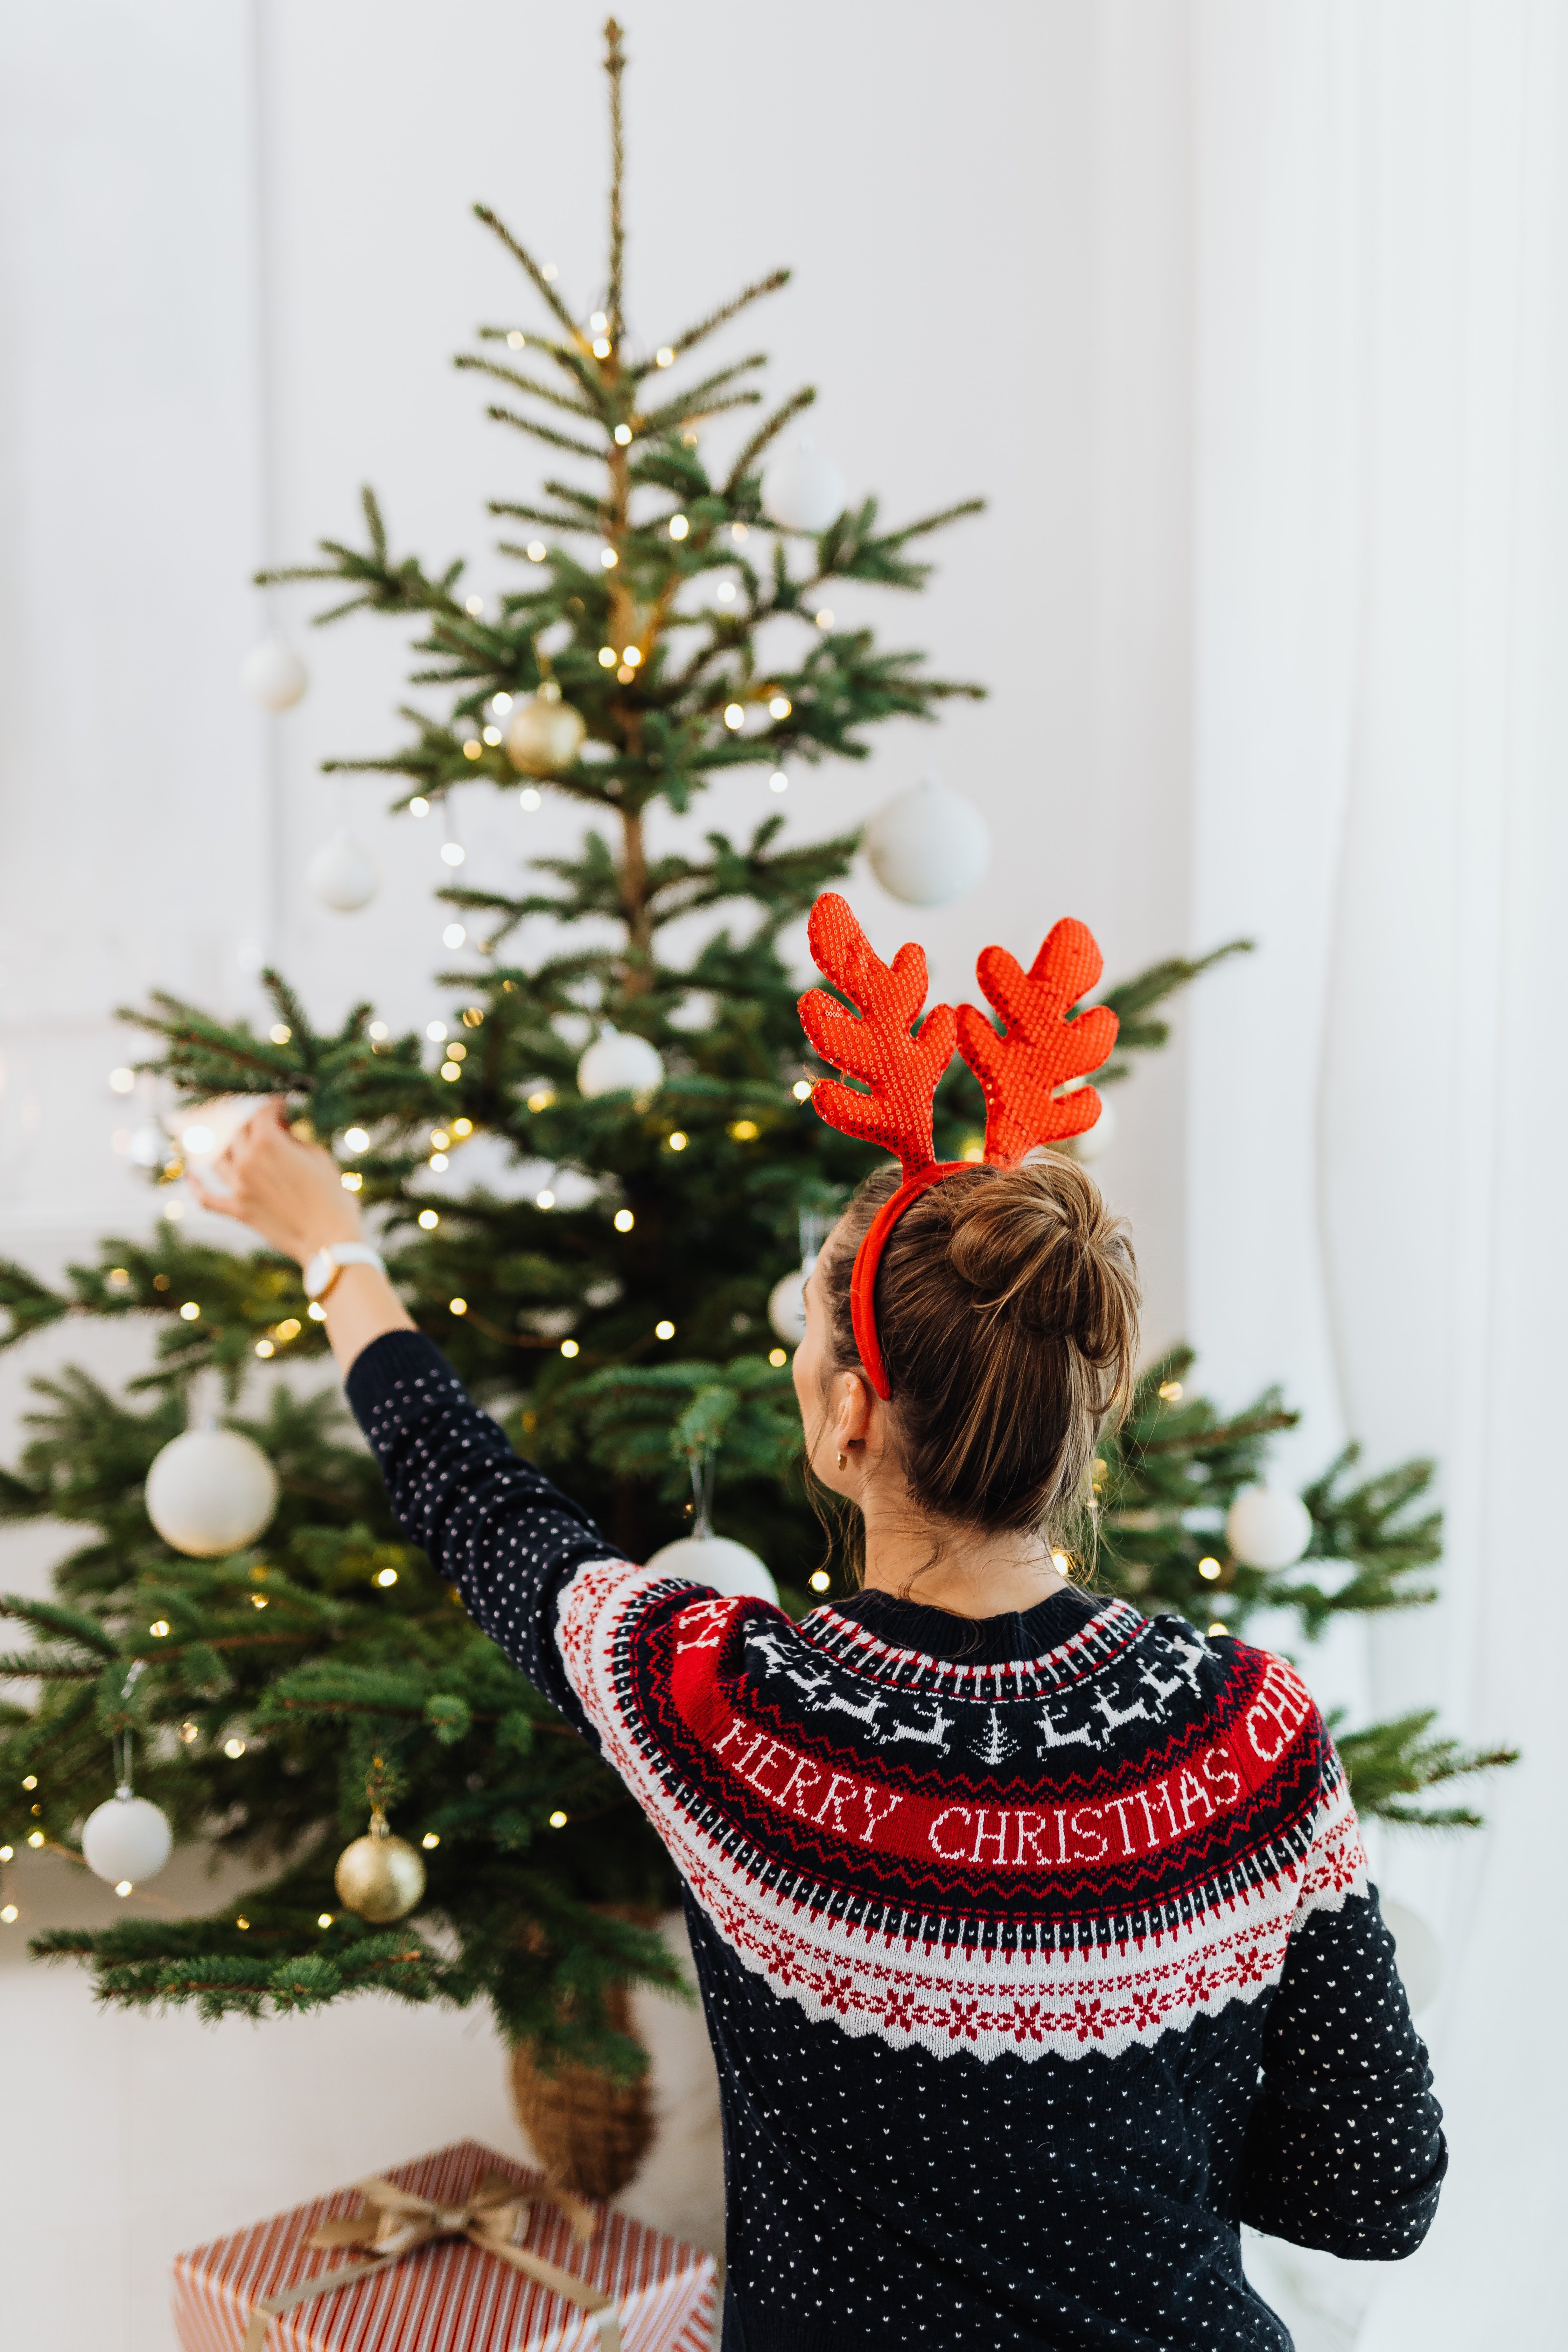 Abbie was hanging the ball on the tree when it fell on the floor and cracked open | Photo: Pexels